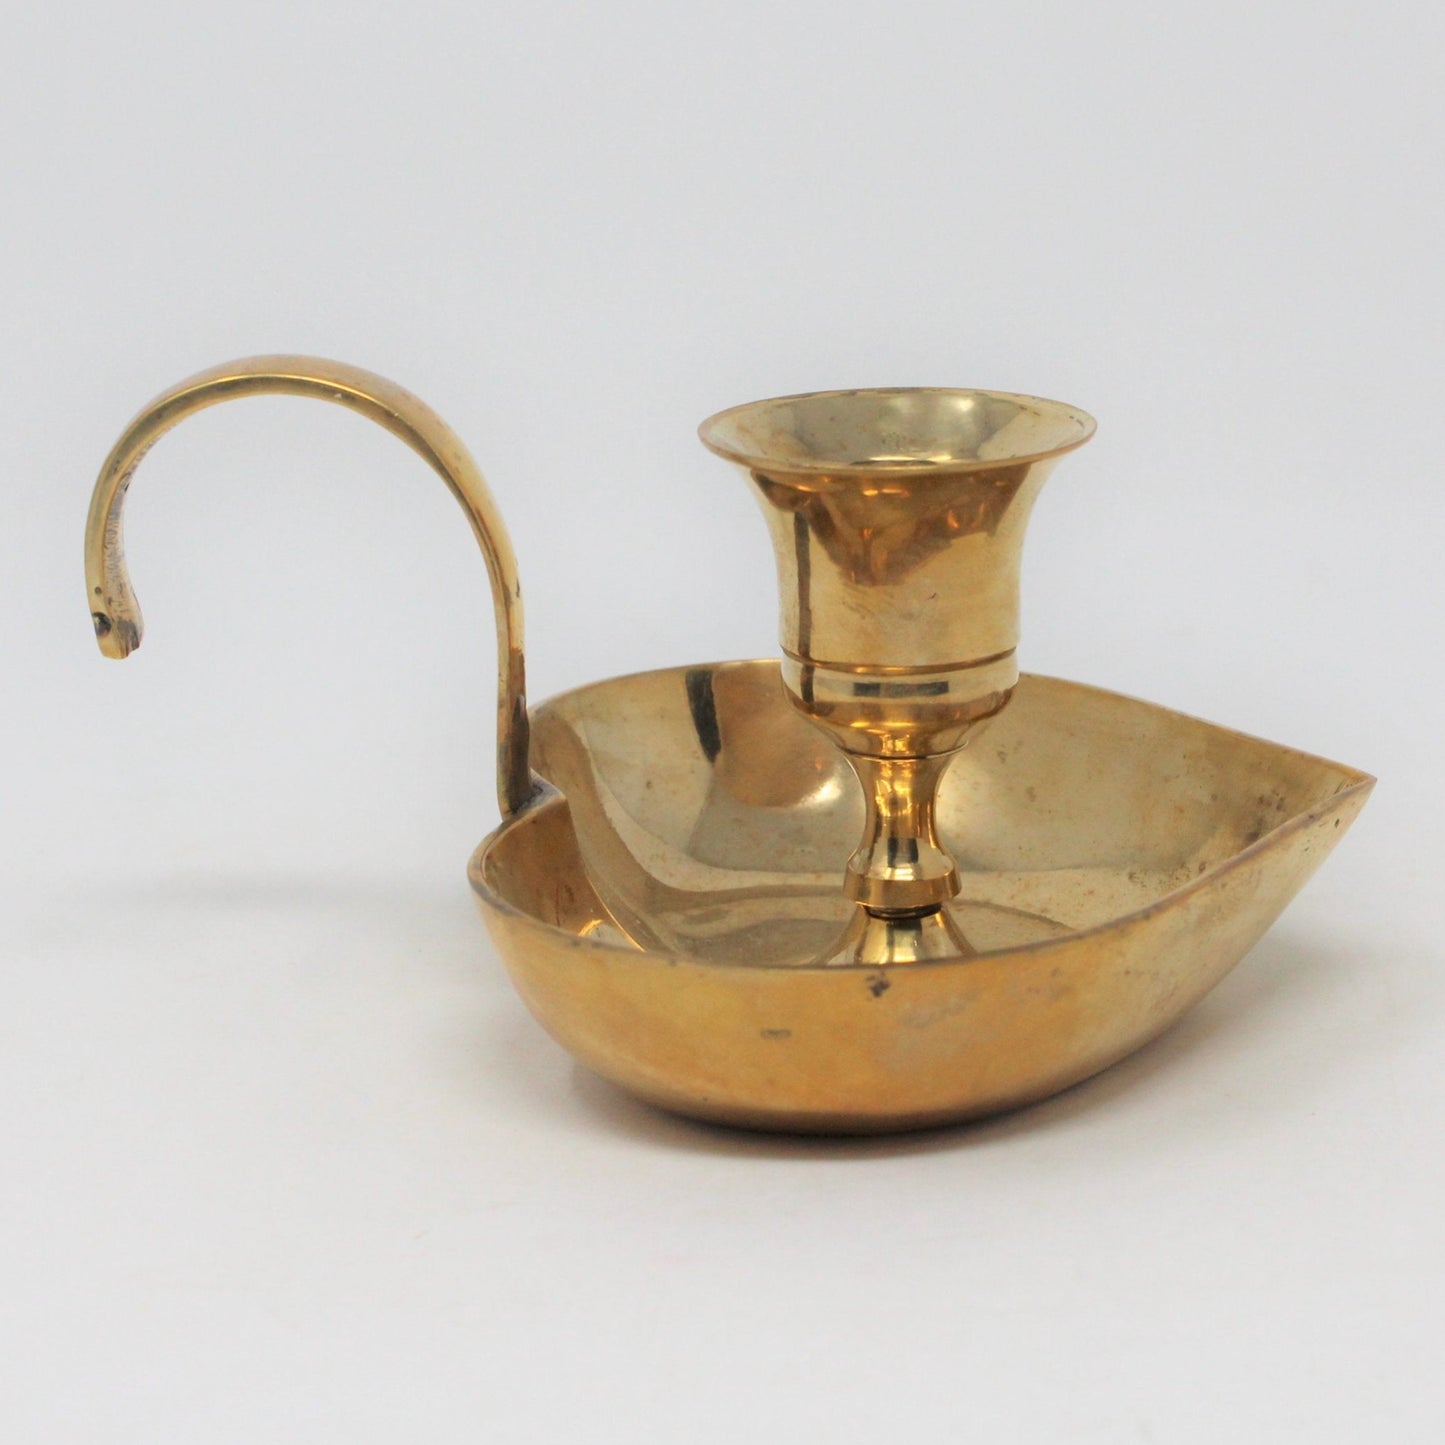 Candle Holder / Chamberstick, Heart Shaped, Brass Taper, India